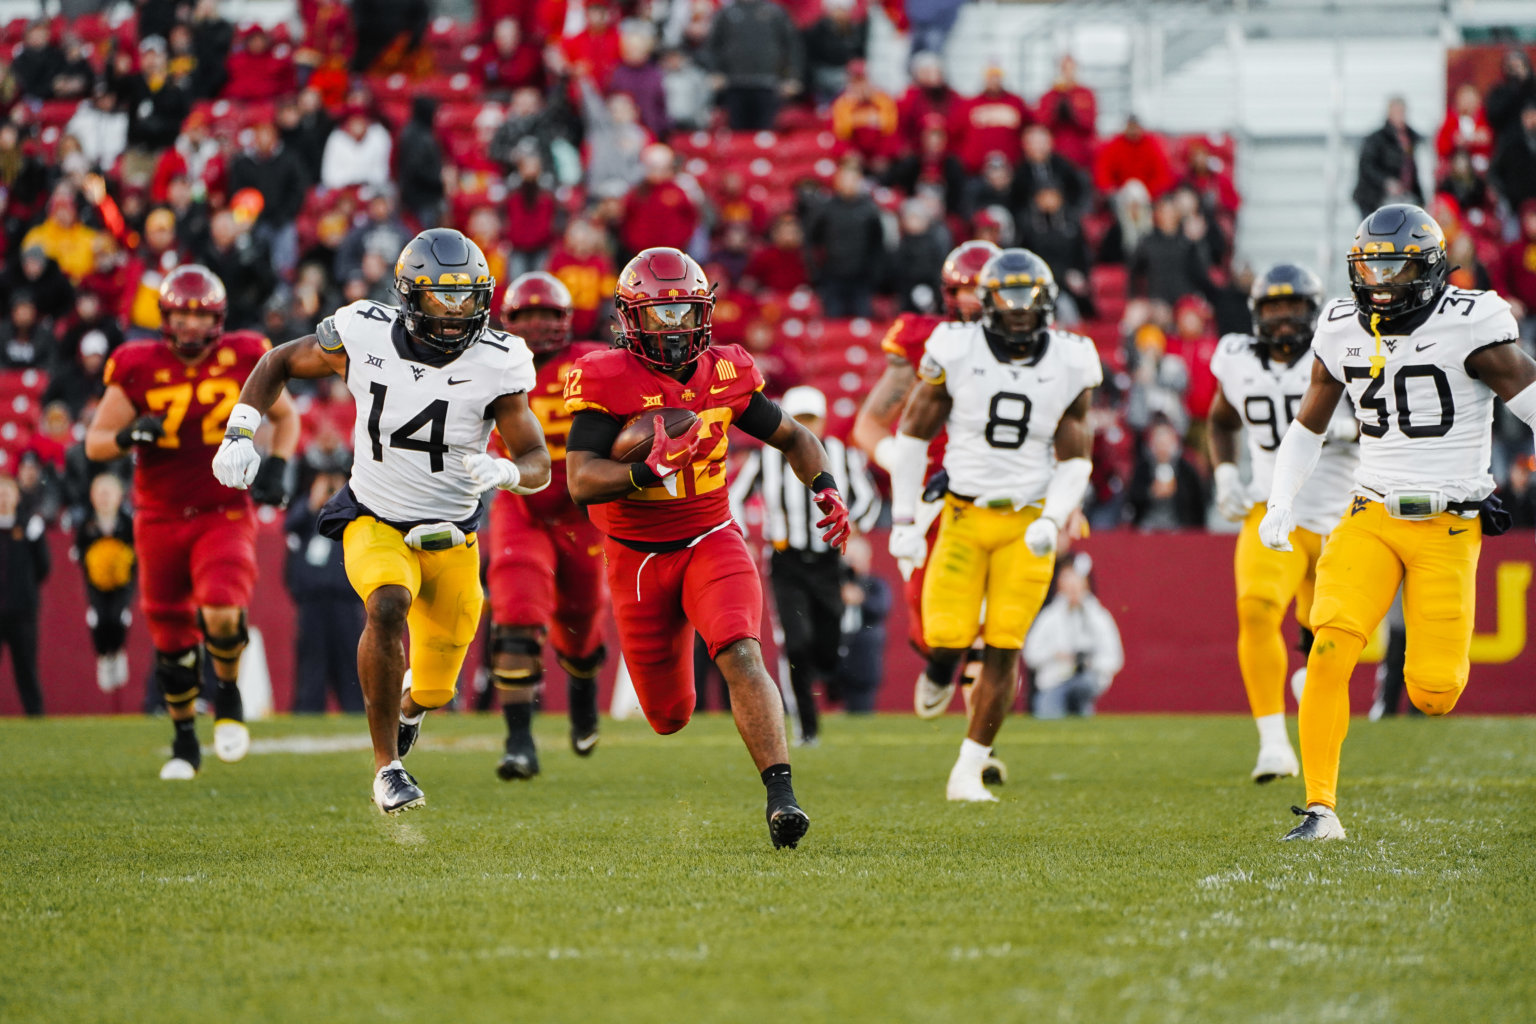 Week 11 College Football Iowa State vs Oklahoma State preview, how to